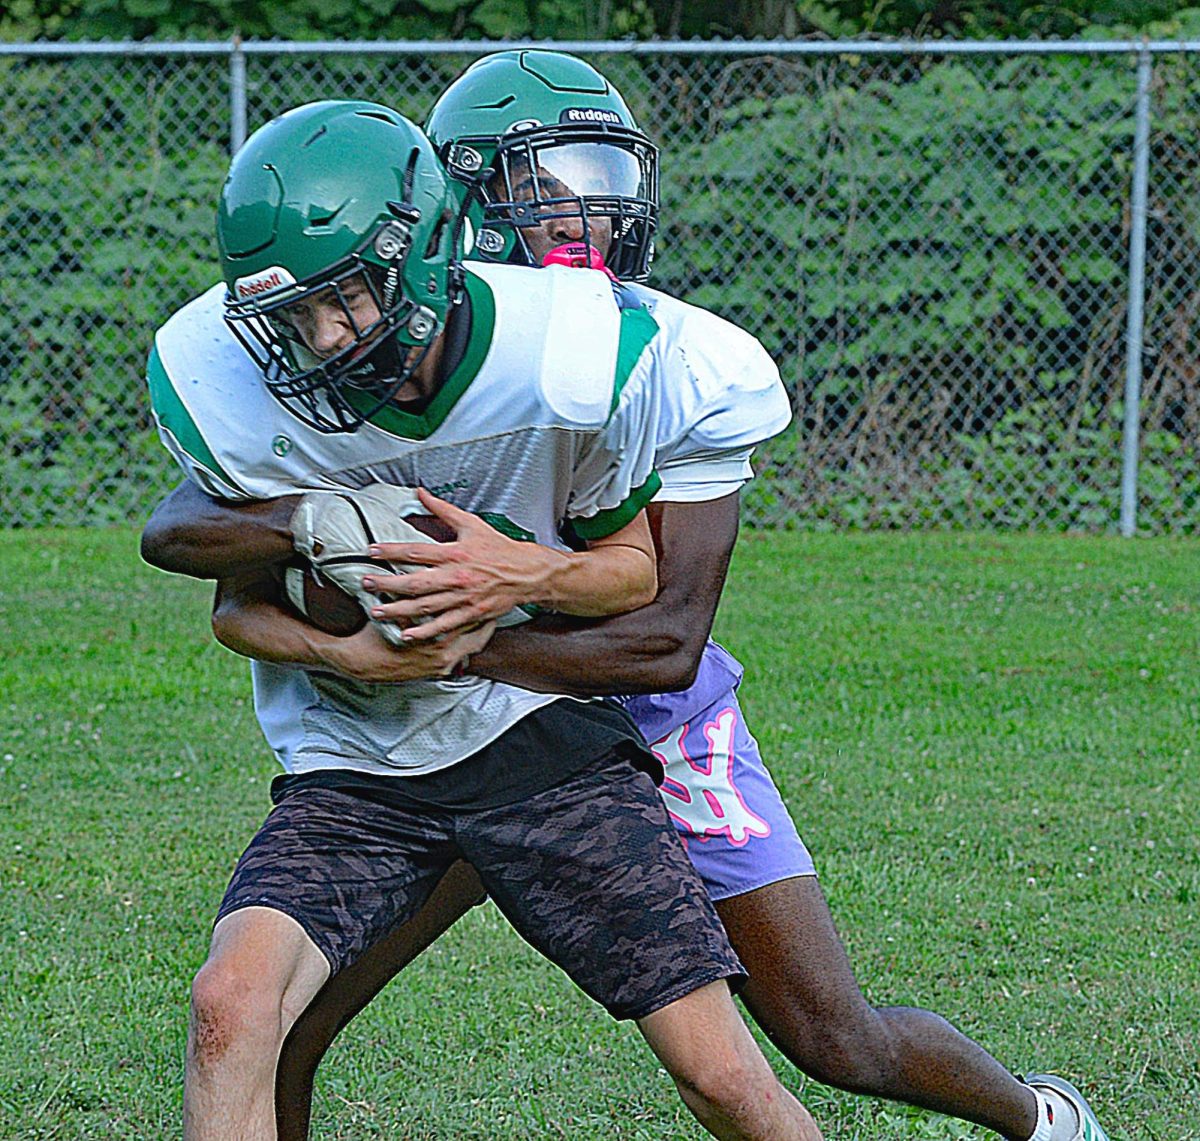 Harlan defensive back Darius Akal wrapped up Charlie Honeycutt during a recent practice session. The Dragons travel to Floyd Central for a scrimmage on Friday and will play host to Twin Springs, Va., in a scrimmage on Aug. 11.